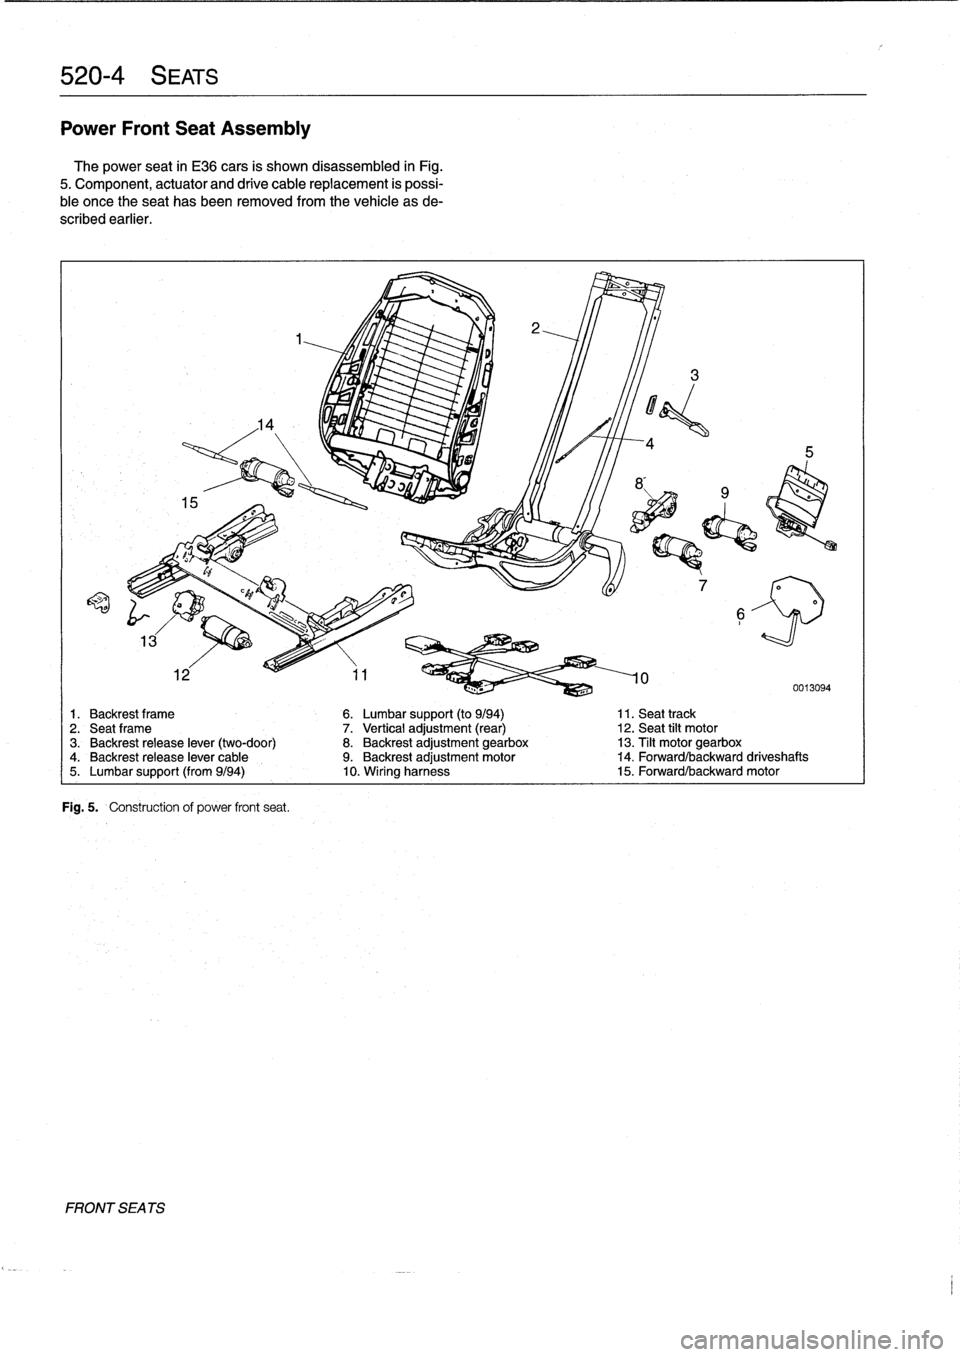 BMW 318i 1997 E36 Workshop Manual 
520-
4
SEATS

Power
Front
Seat
Assembly
The
power
seat
in
E36
cars
is
shown
disassembled
in
Fig
.

5
.
Component,
actuator
and
drive
cable
replacement
is
possi-
ble
once
theseat
has
been
removed
from